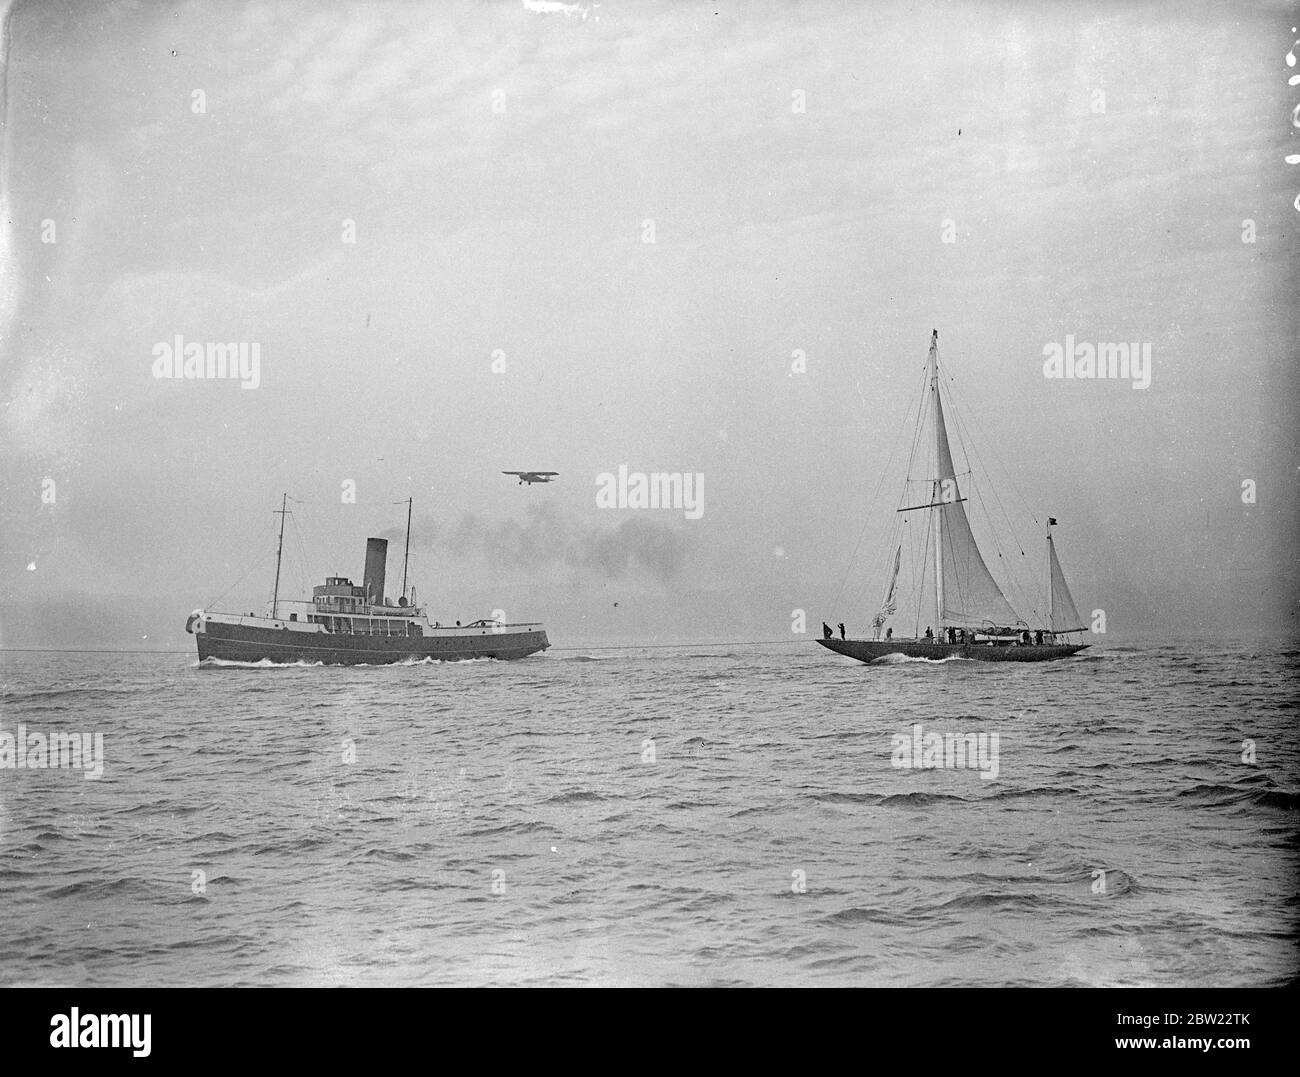 The Endeavour I being towed into the harbour. Captain Nad Heard, master of the endeavour I brought the crew and yachts safely into port in Hampshire. After their lone 2000 mile voyage across the Atlantic. 1 October 1937. Stock Photo